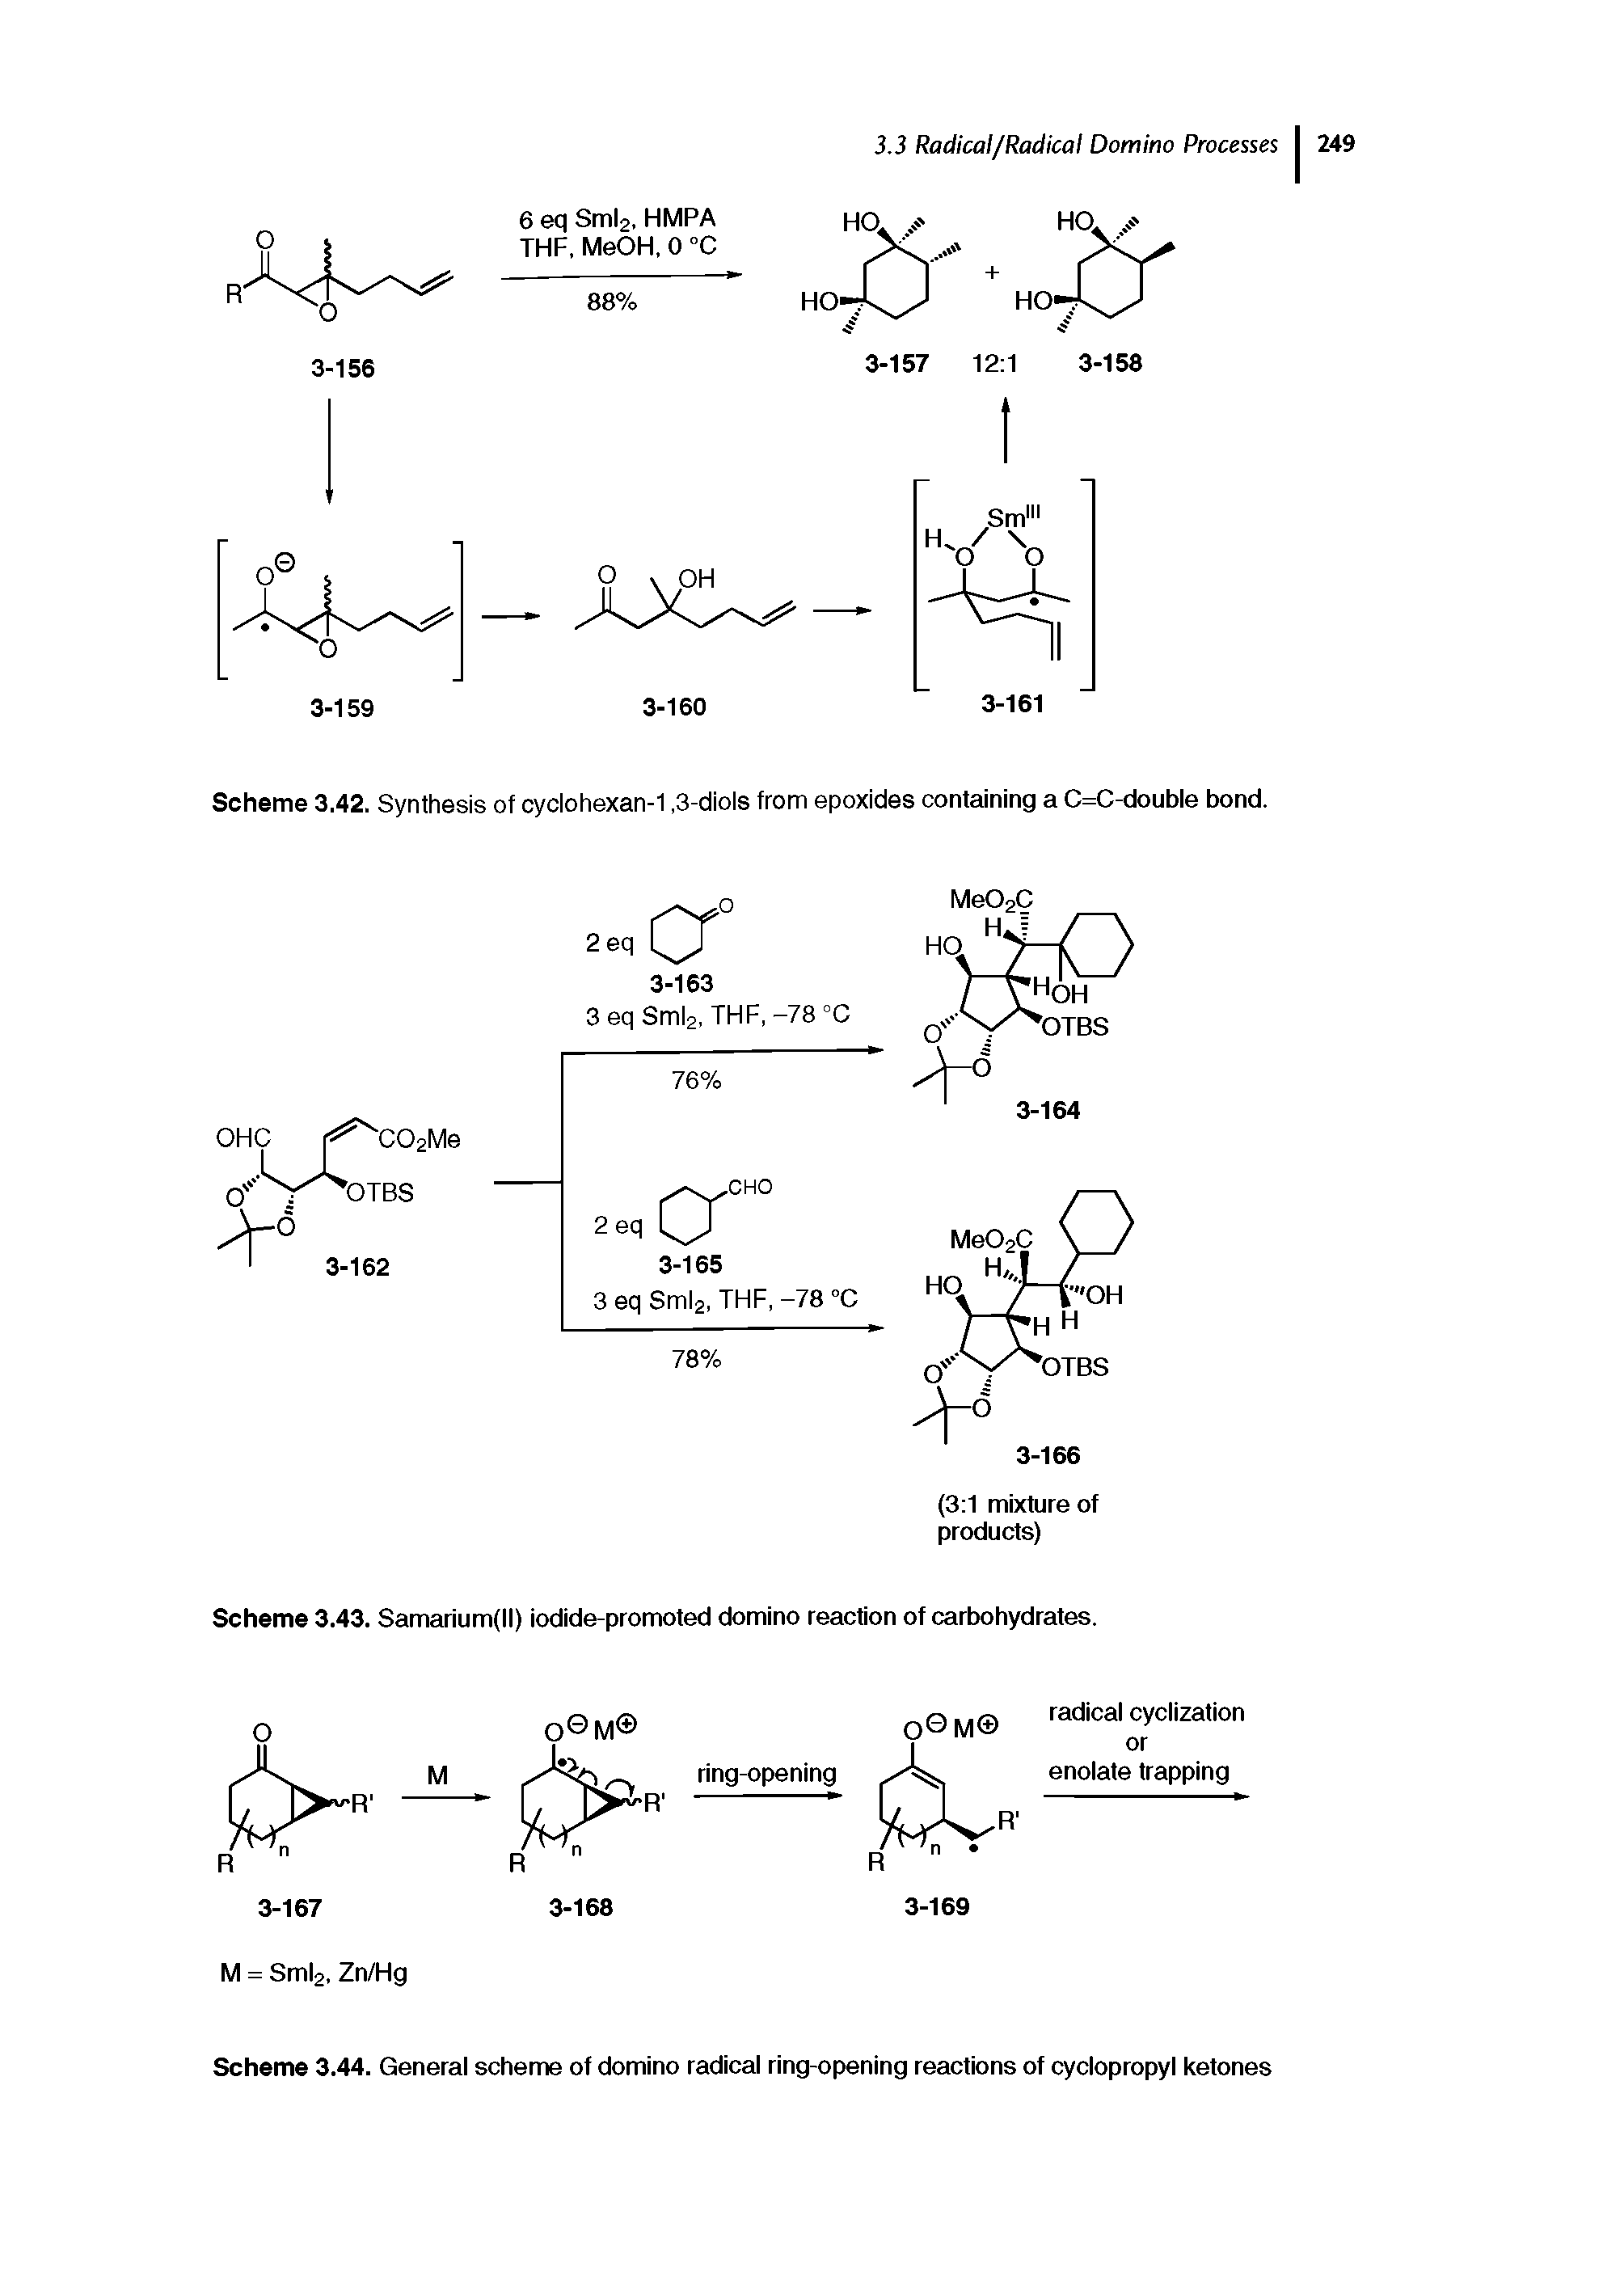 Scheme 3.42. Synthesis of cyclohexan-1,3-diols from epoxides containing a C=C-double bond.